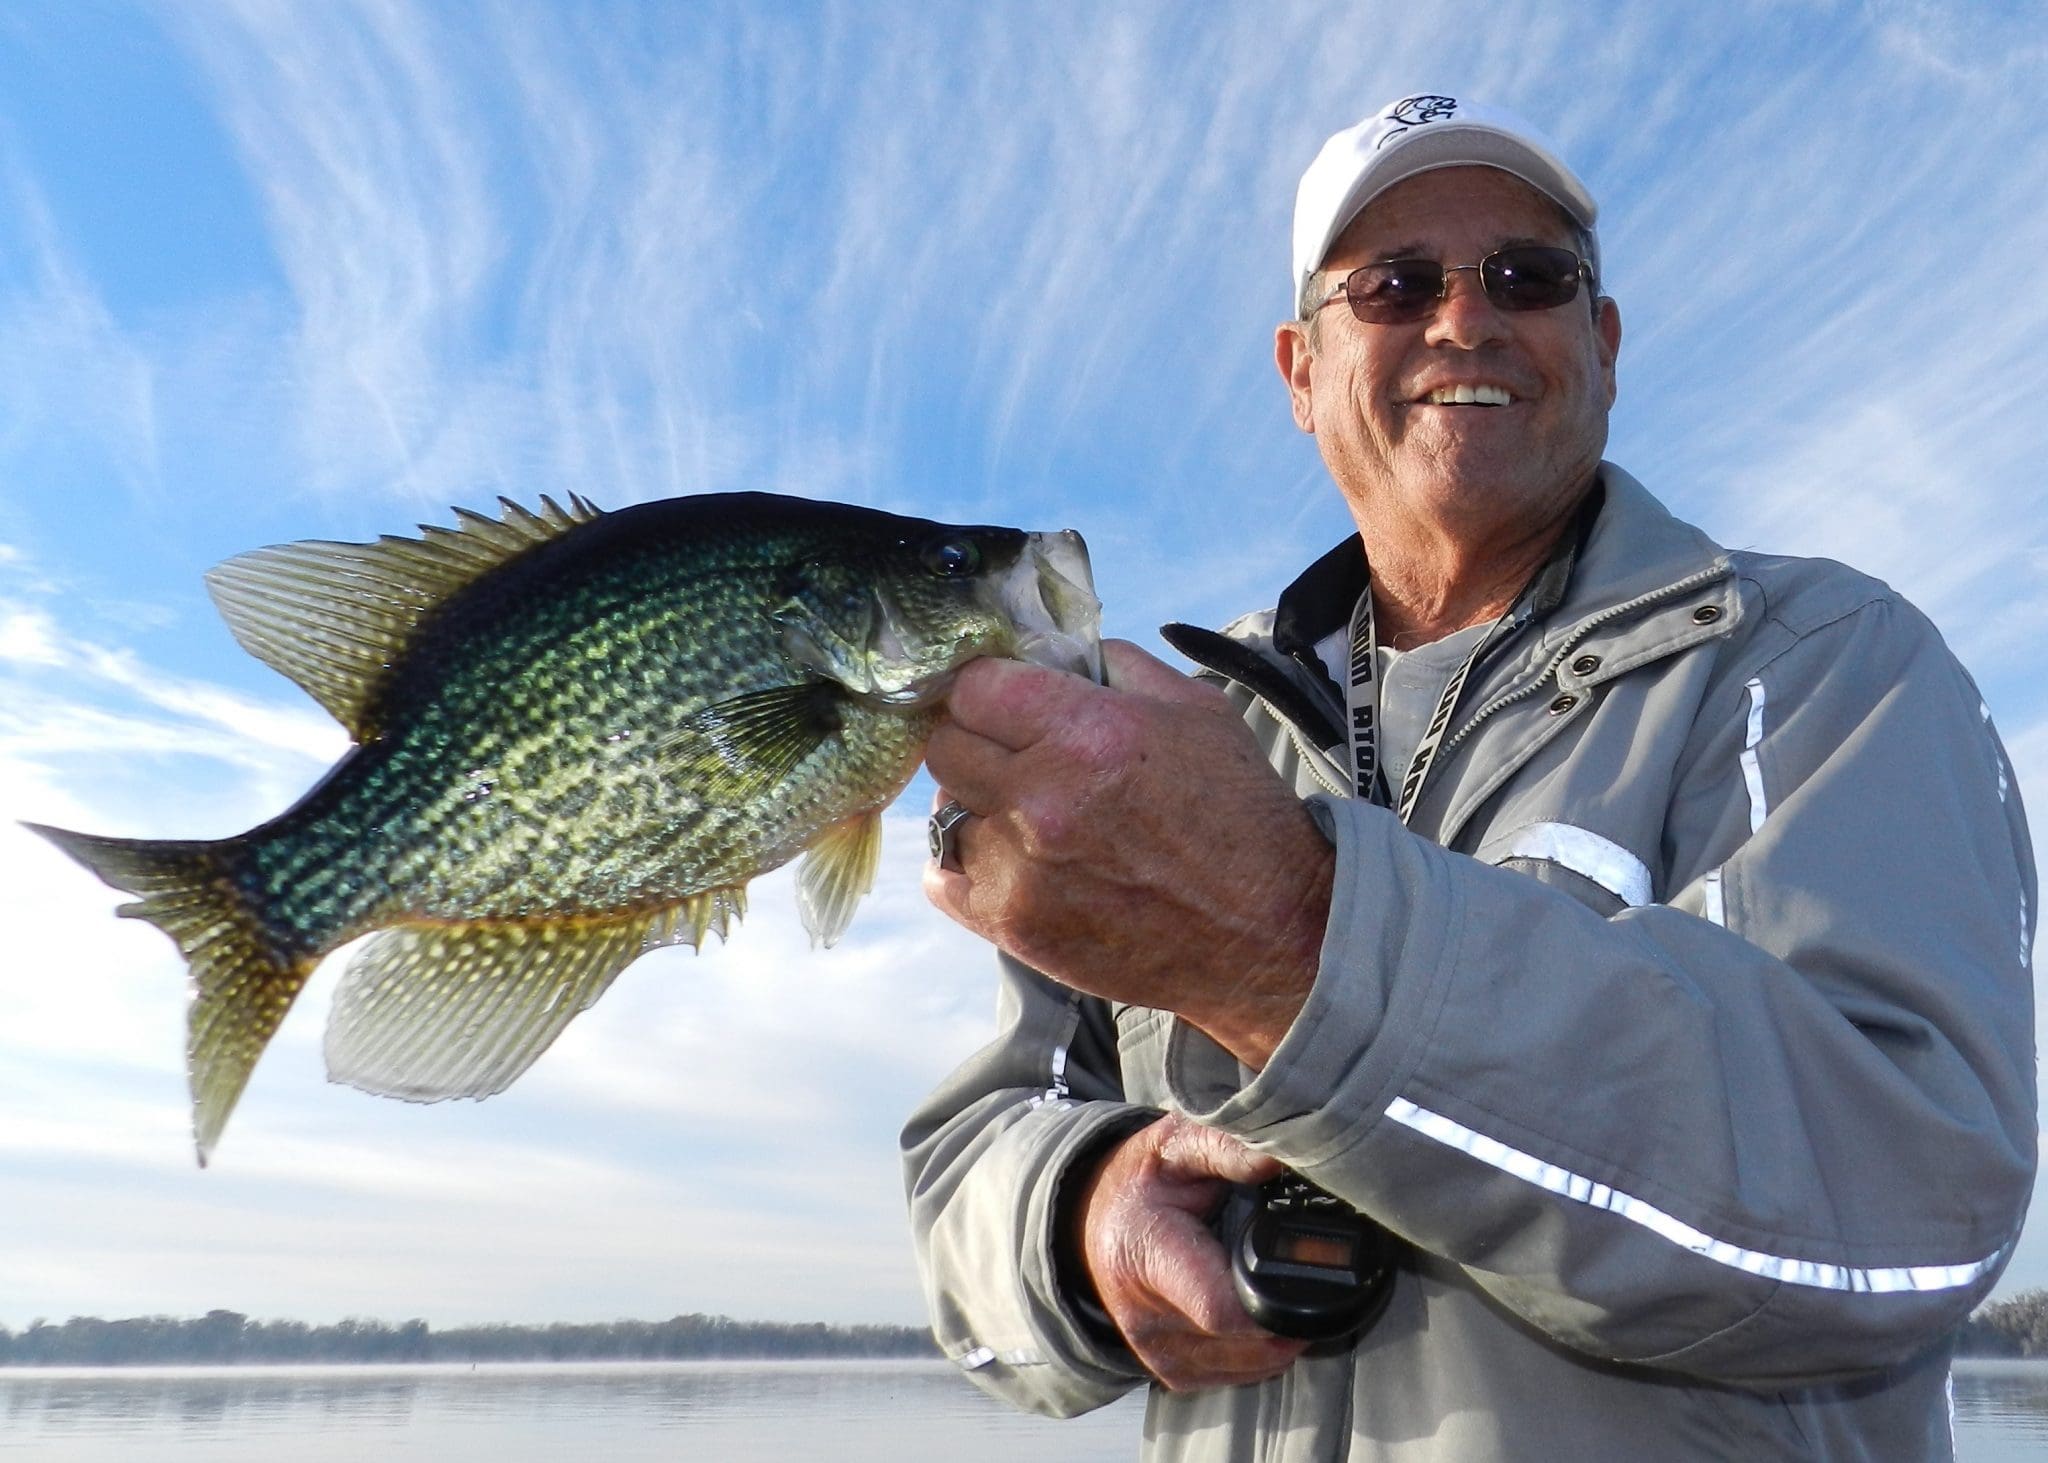 Crappie USA fishing tournament coming to Lake County Lake & Sumter STYLE